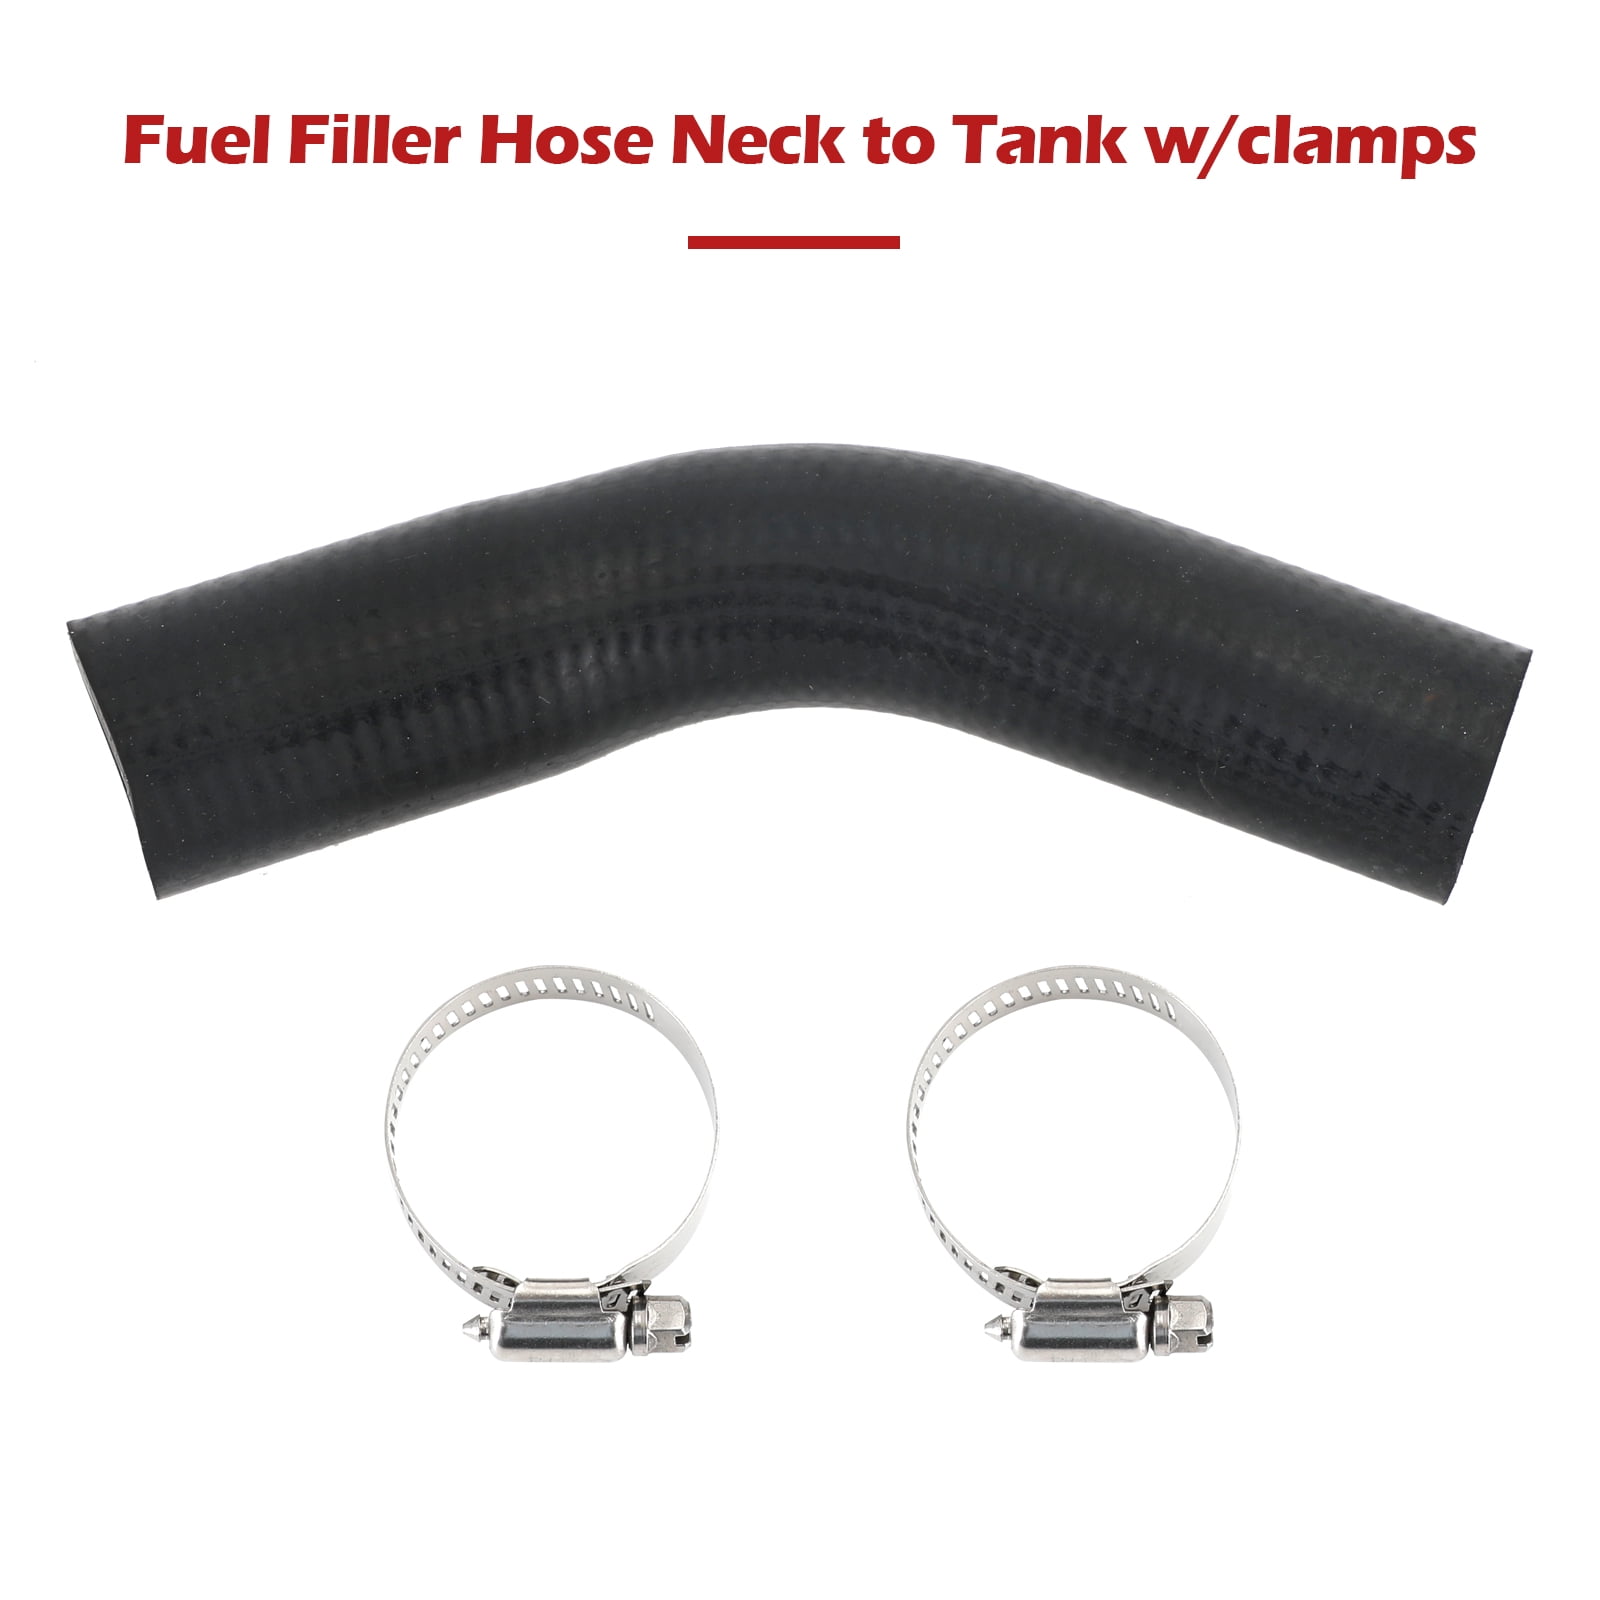 Fuel Filler Hose Neck to Tank W/Clamps For Jeep TJ Wrangler 2003 2004-2006  